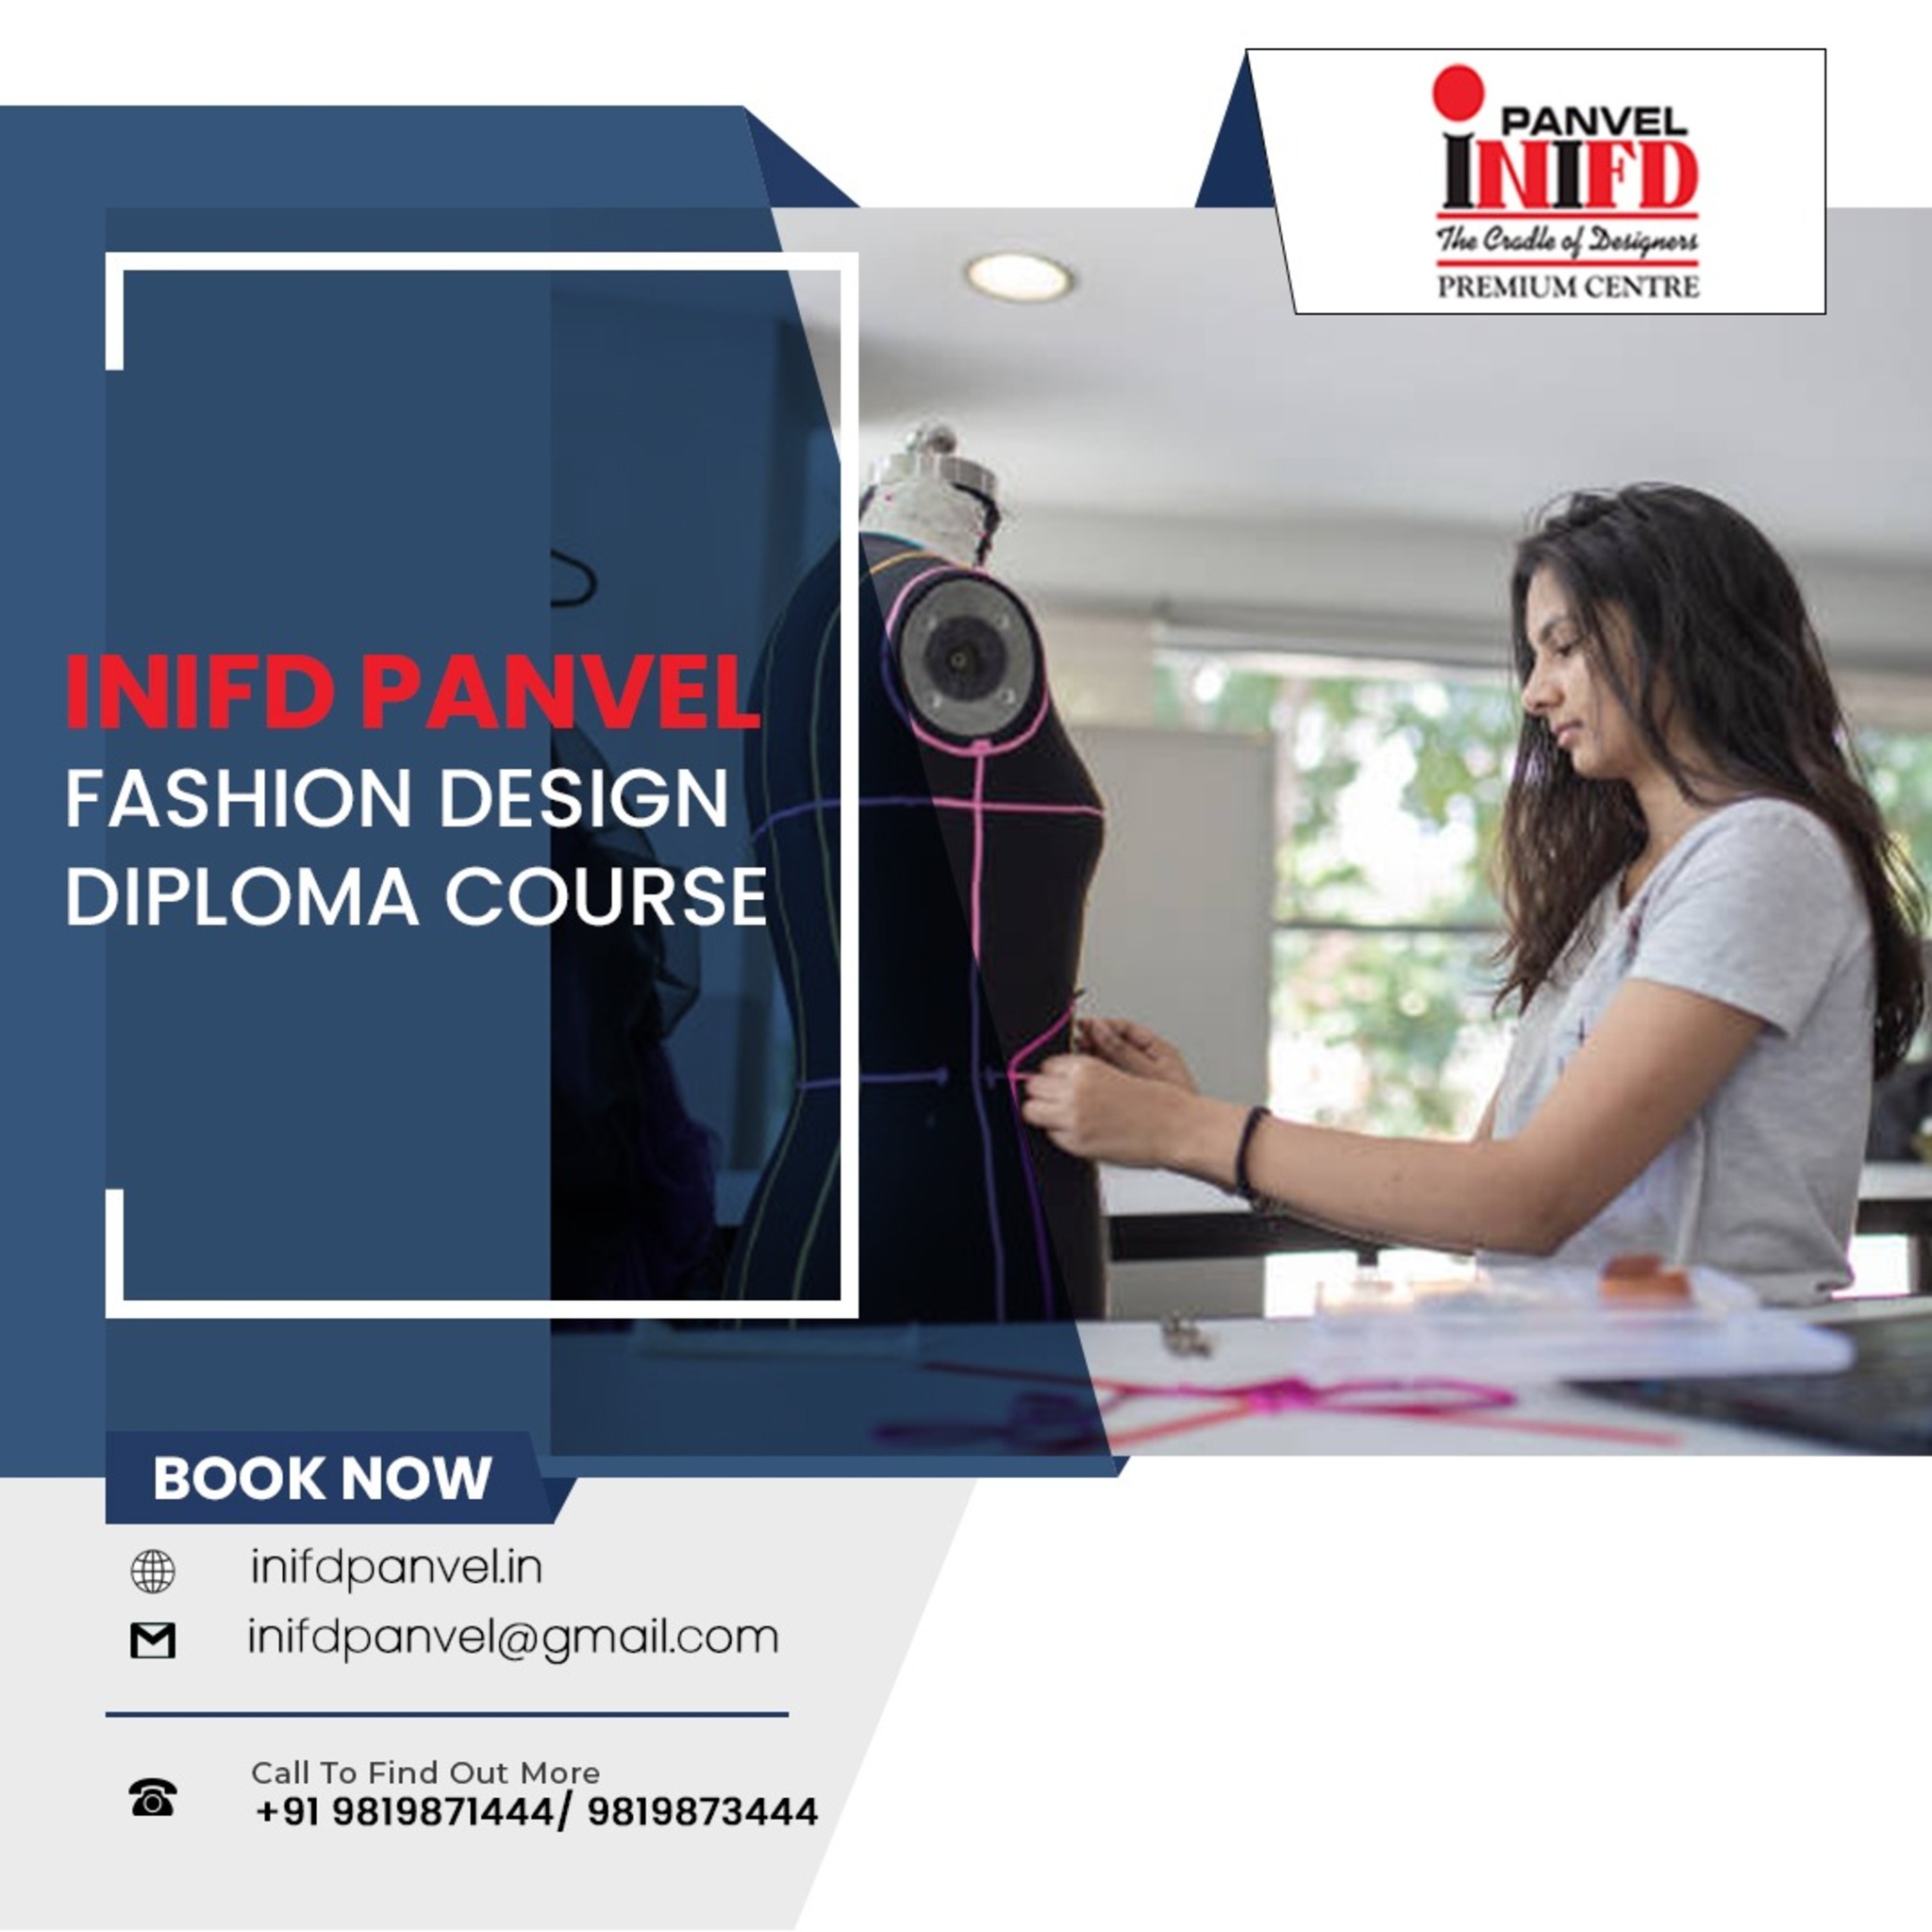 0 PANVEL

  
    
   

The Credle of Designers

PREMIUM CENTRE

 

FASHION DESIGN
DIPLOMA COURSE

BOOK NOW

@ inifdpanvelin
M inifdpanvel@gmailcom

— Call To Find Out
a +91 9819871444] 9819873444